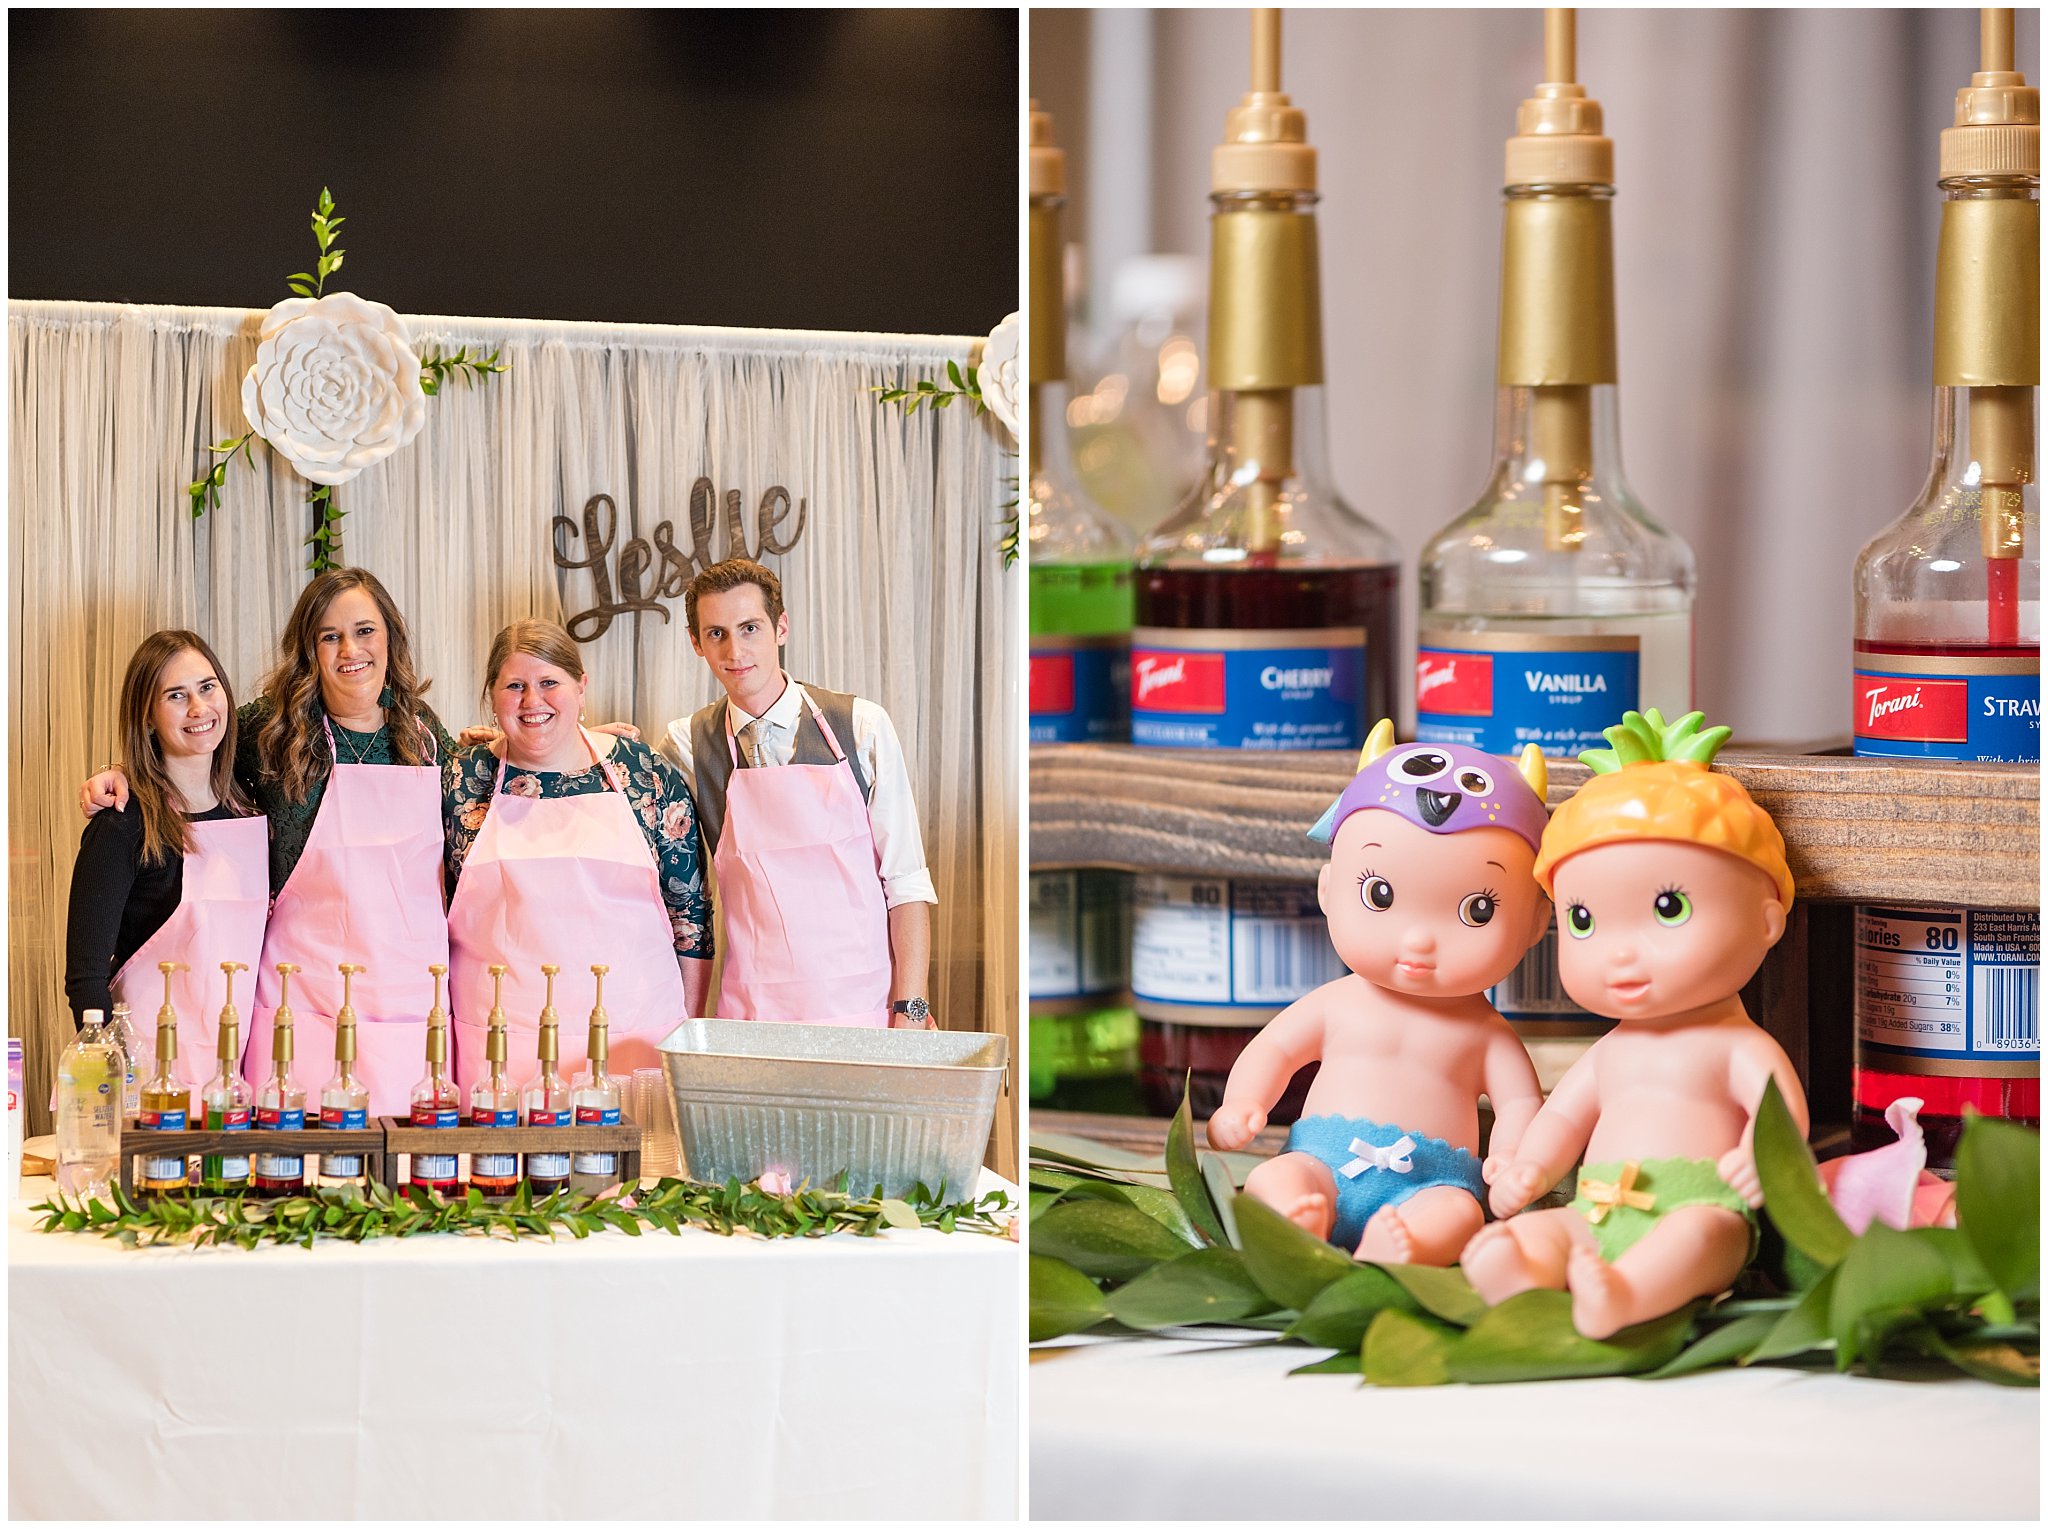 Wedding servers in pink aprons | Ogden Temple Wedding | Jessie and Dallin Photography